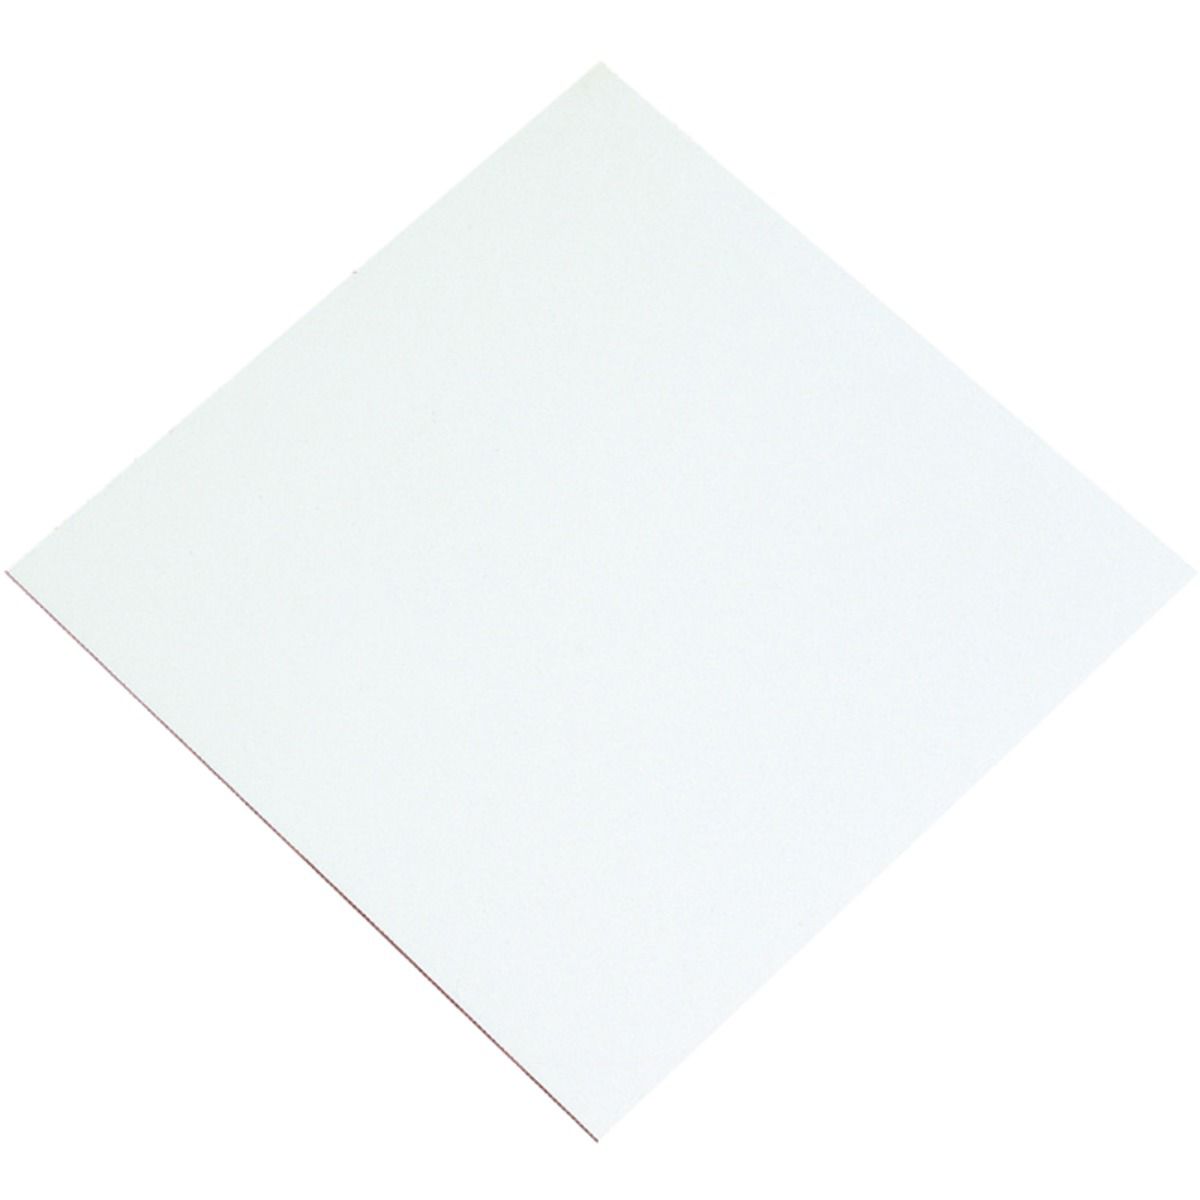 Image of Wickes General Purpose White Faced Hardboard Sheet - 3 x 610 x 1220mm